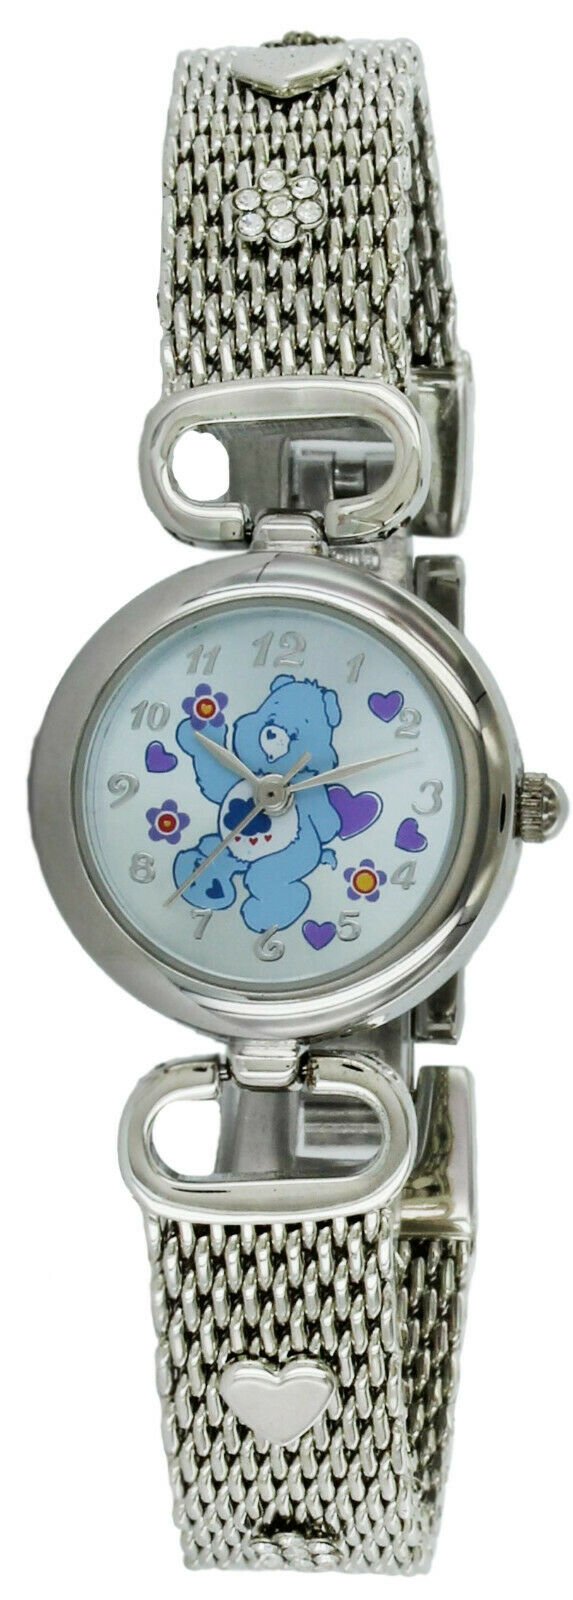 Model: Rare CARE BEARS Collectible Silver Tone Ladies Watch